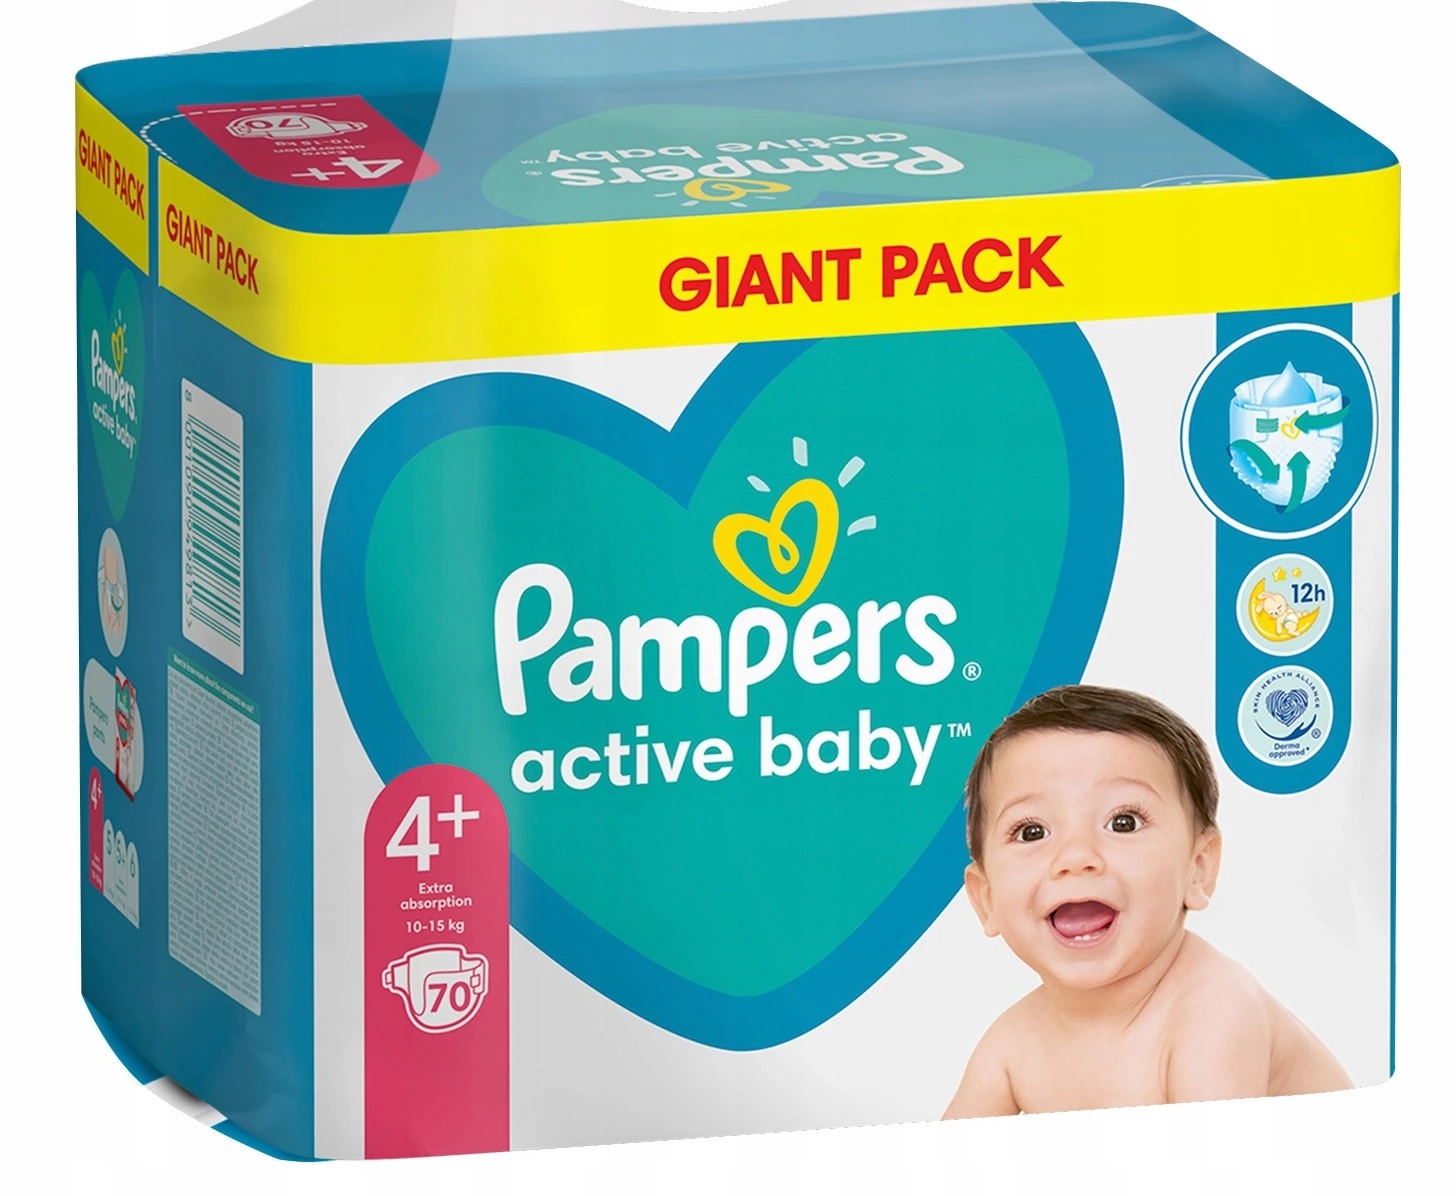 carrefour pampers cena